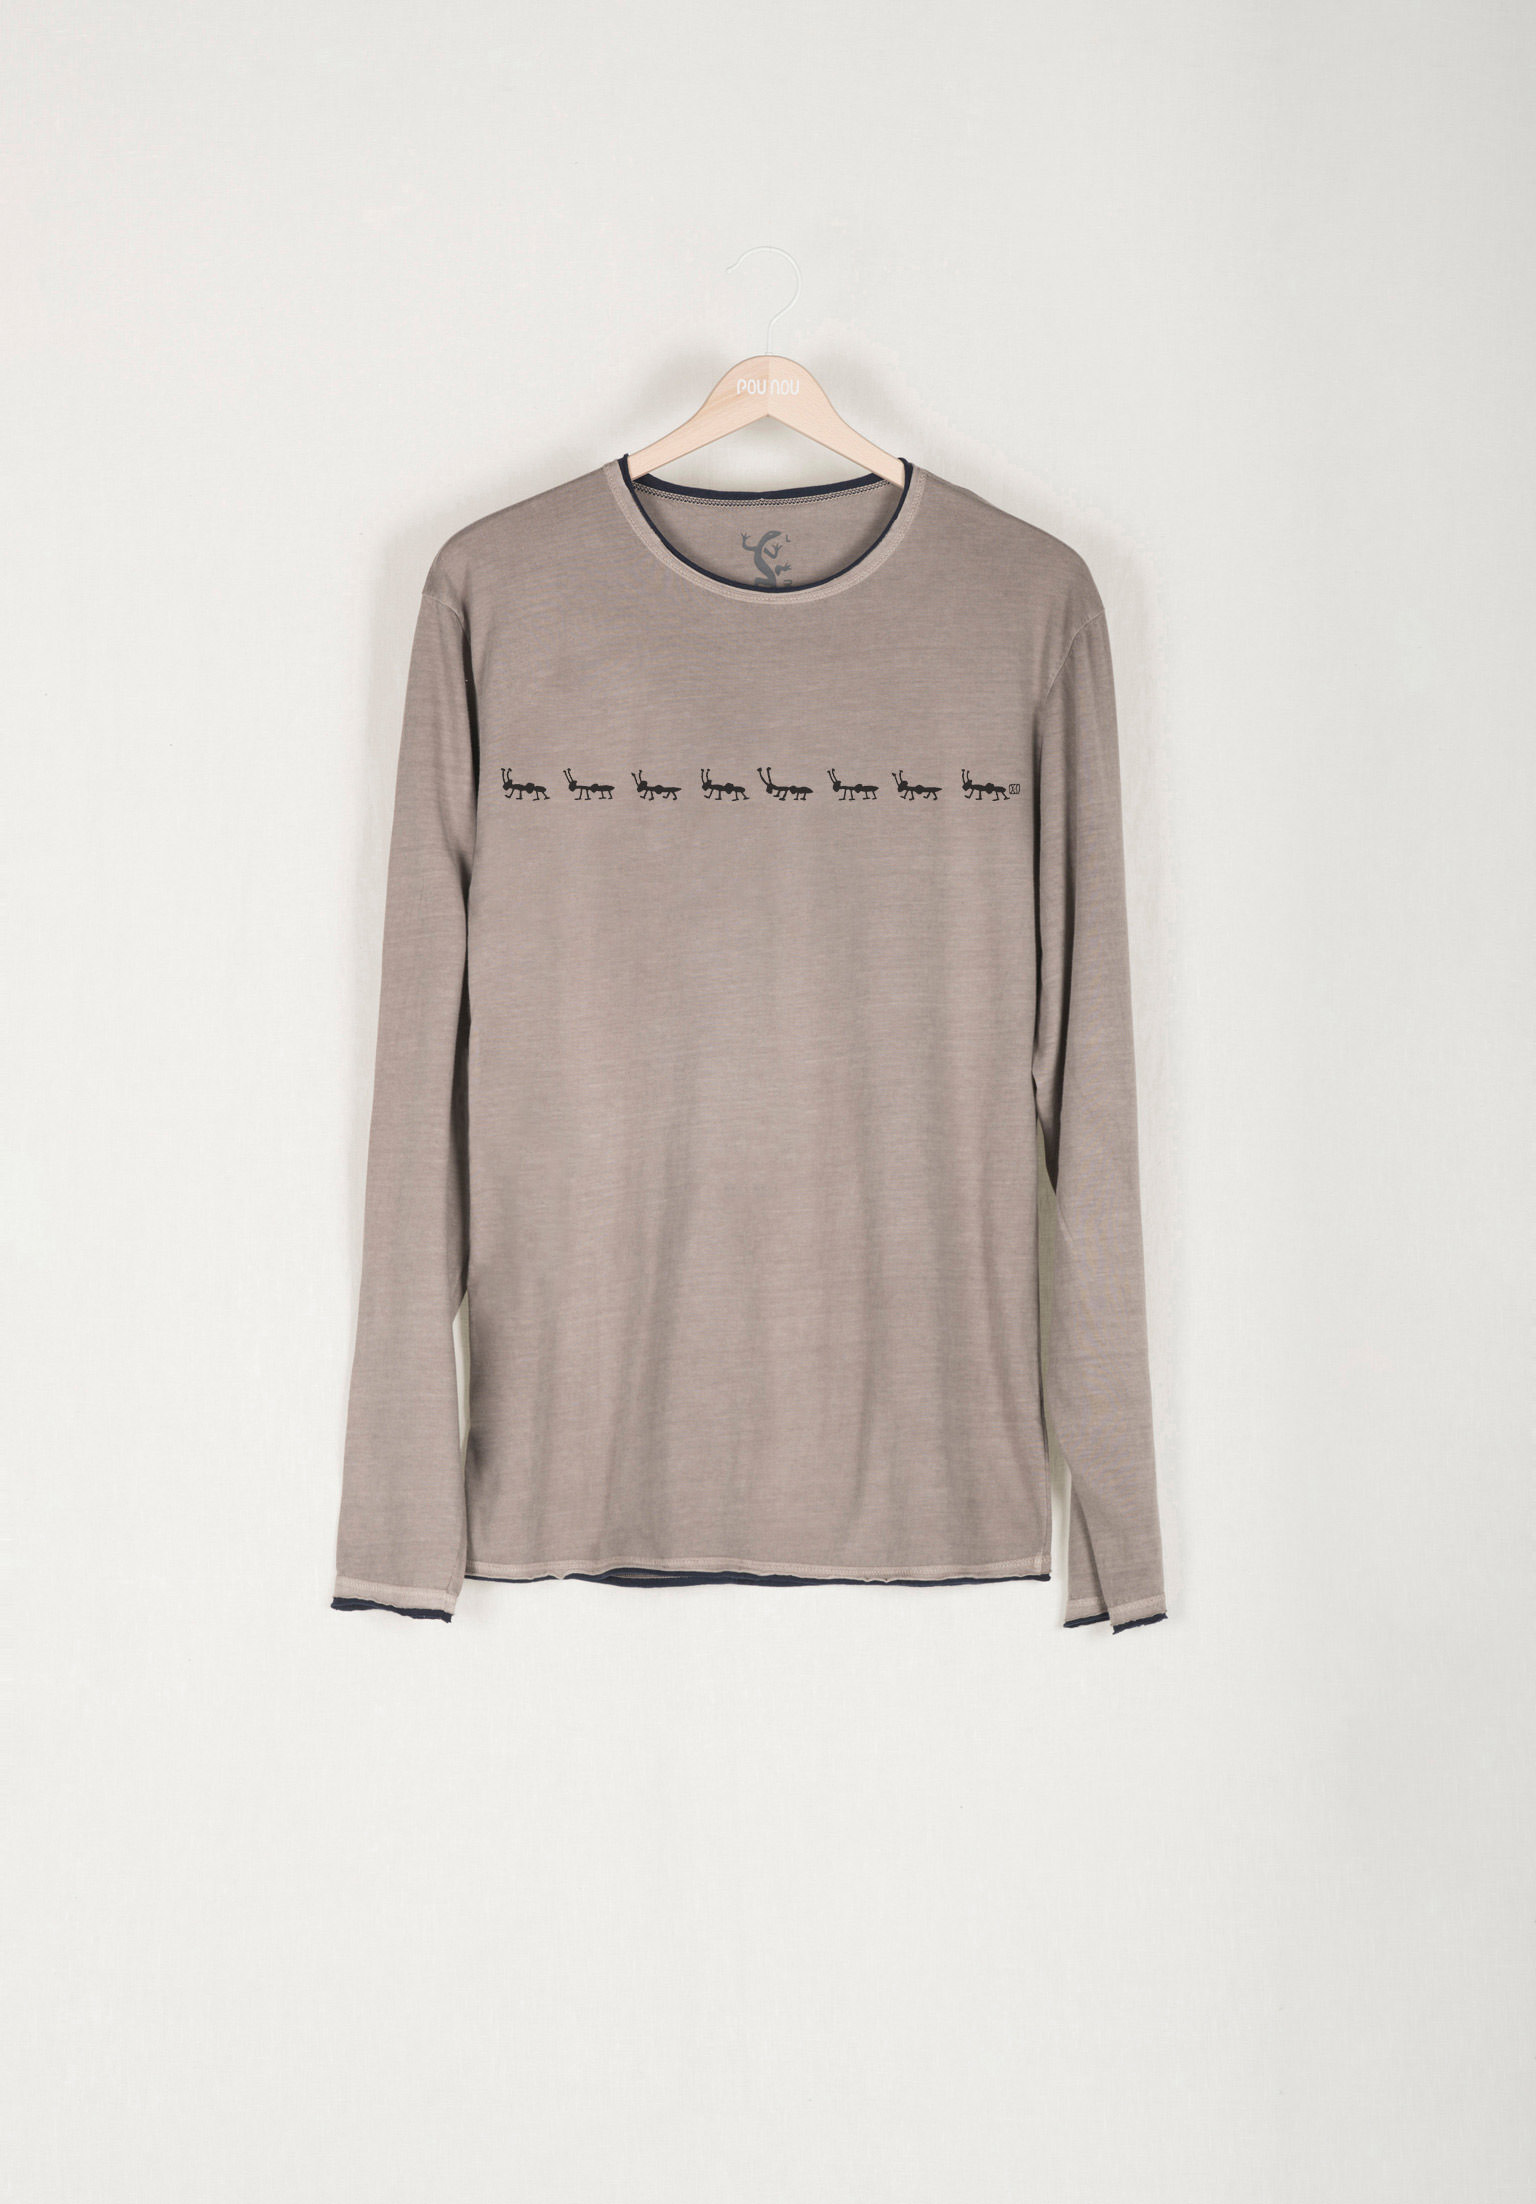 Long-sleeved cotton t-shirt rollie ants